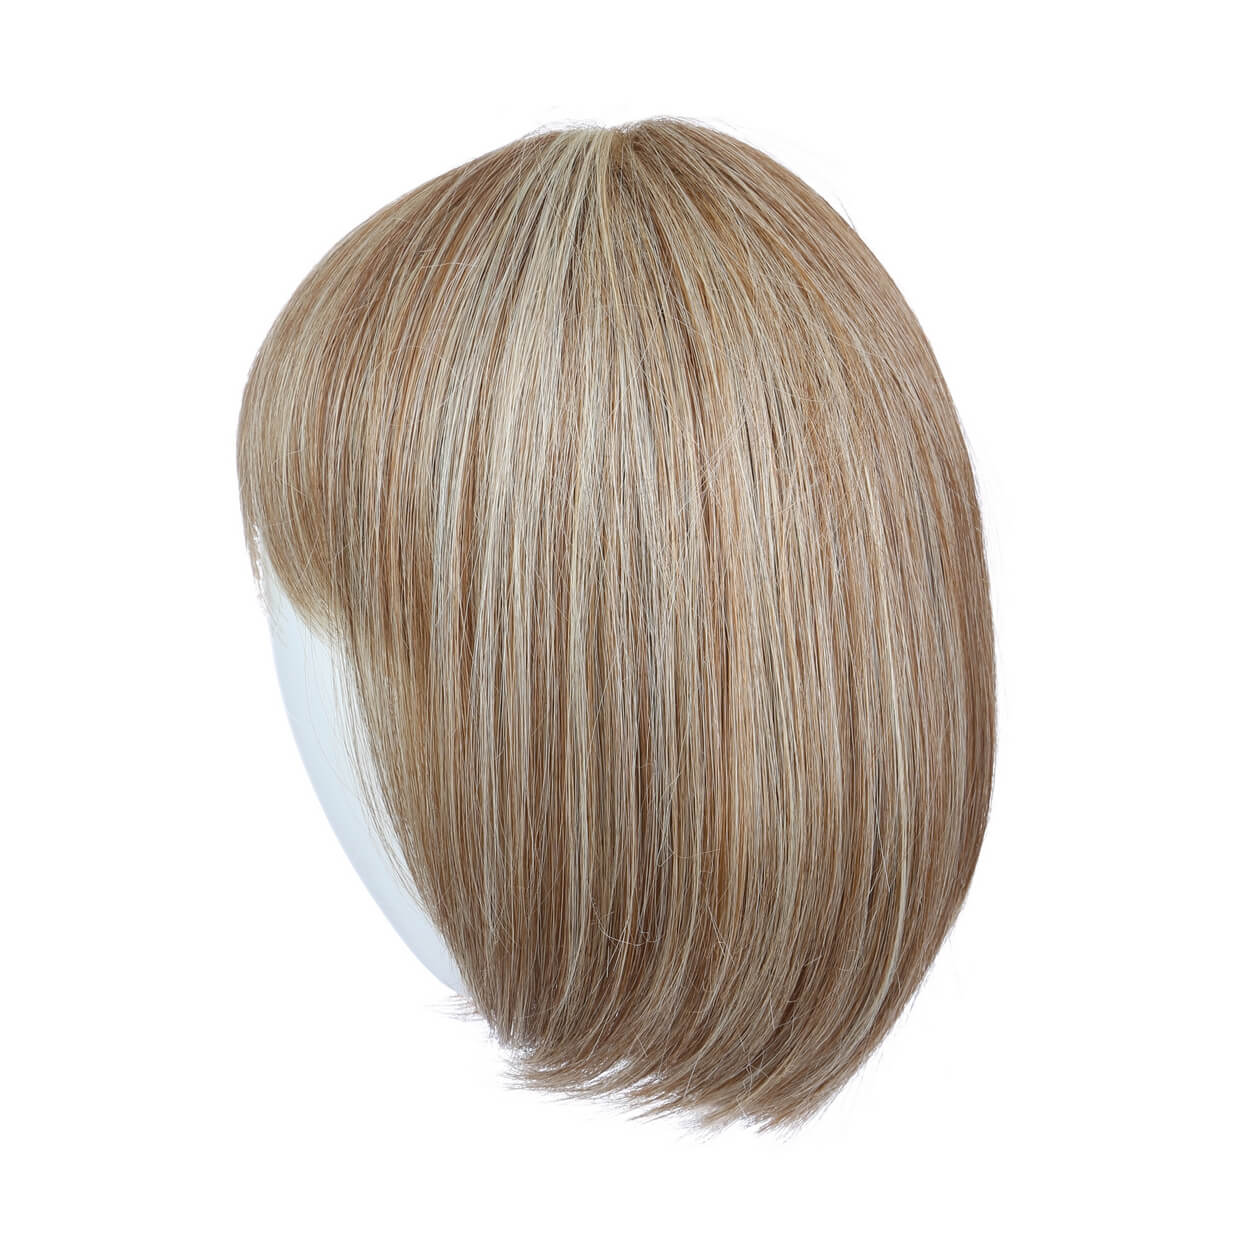 Classic Cut by Raquel Welch Product Image